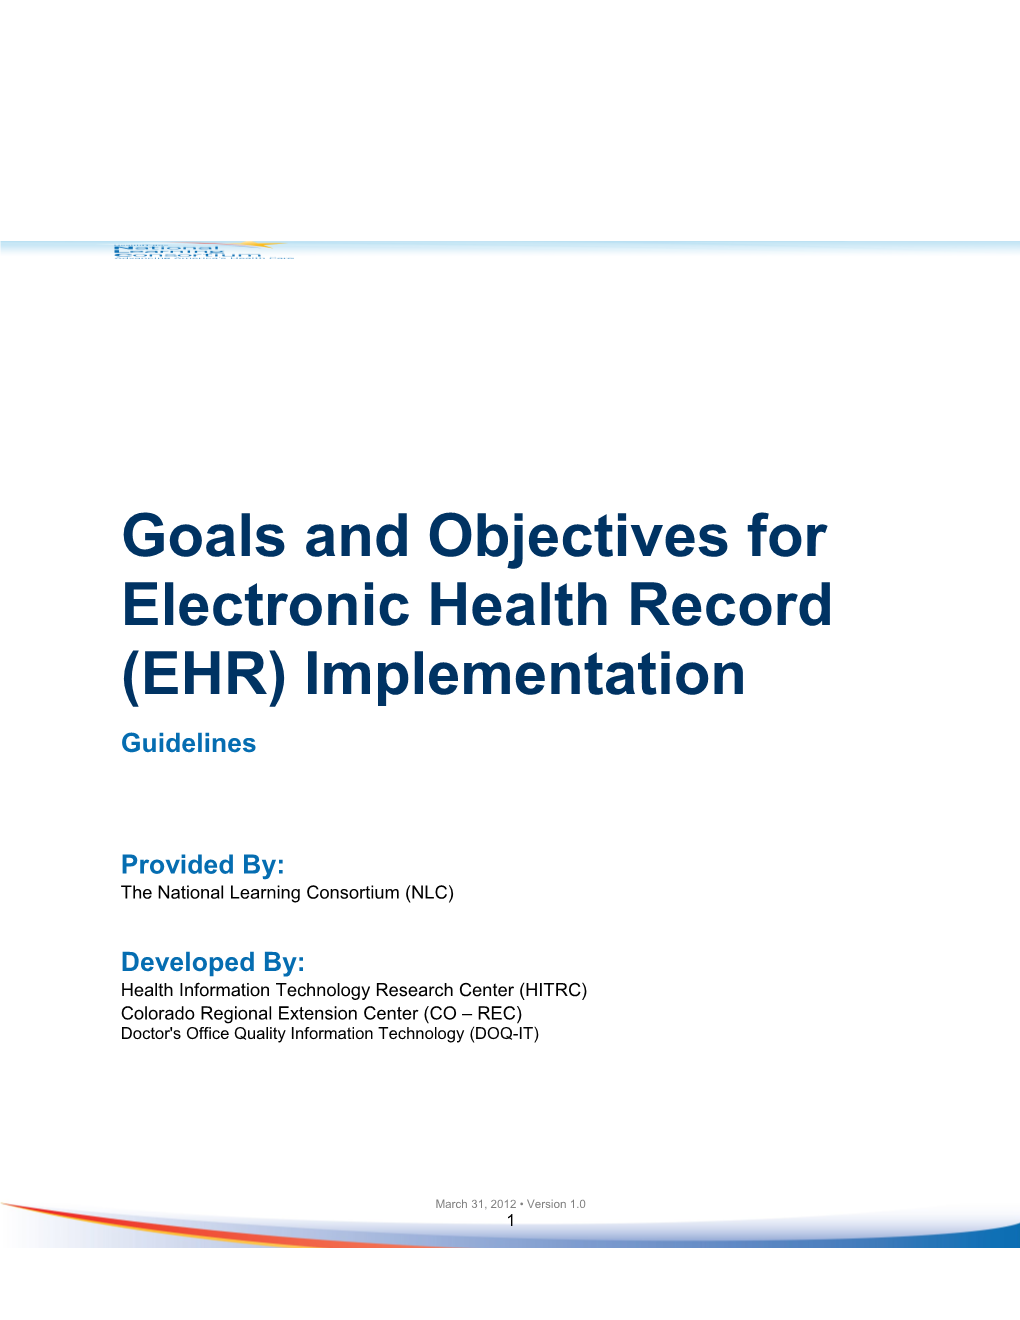 Goals and Objectives for Electronic Health Record (EHR) Implementation